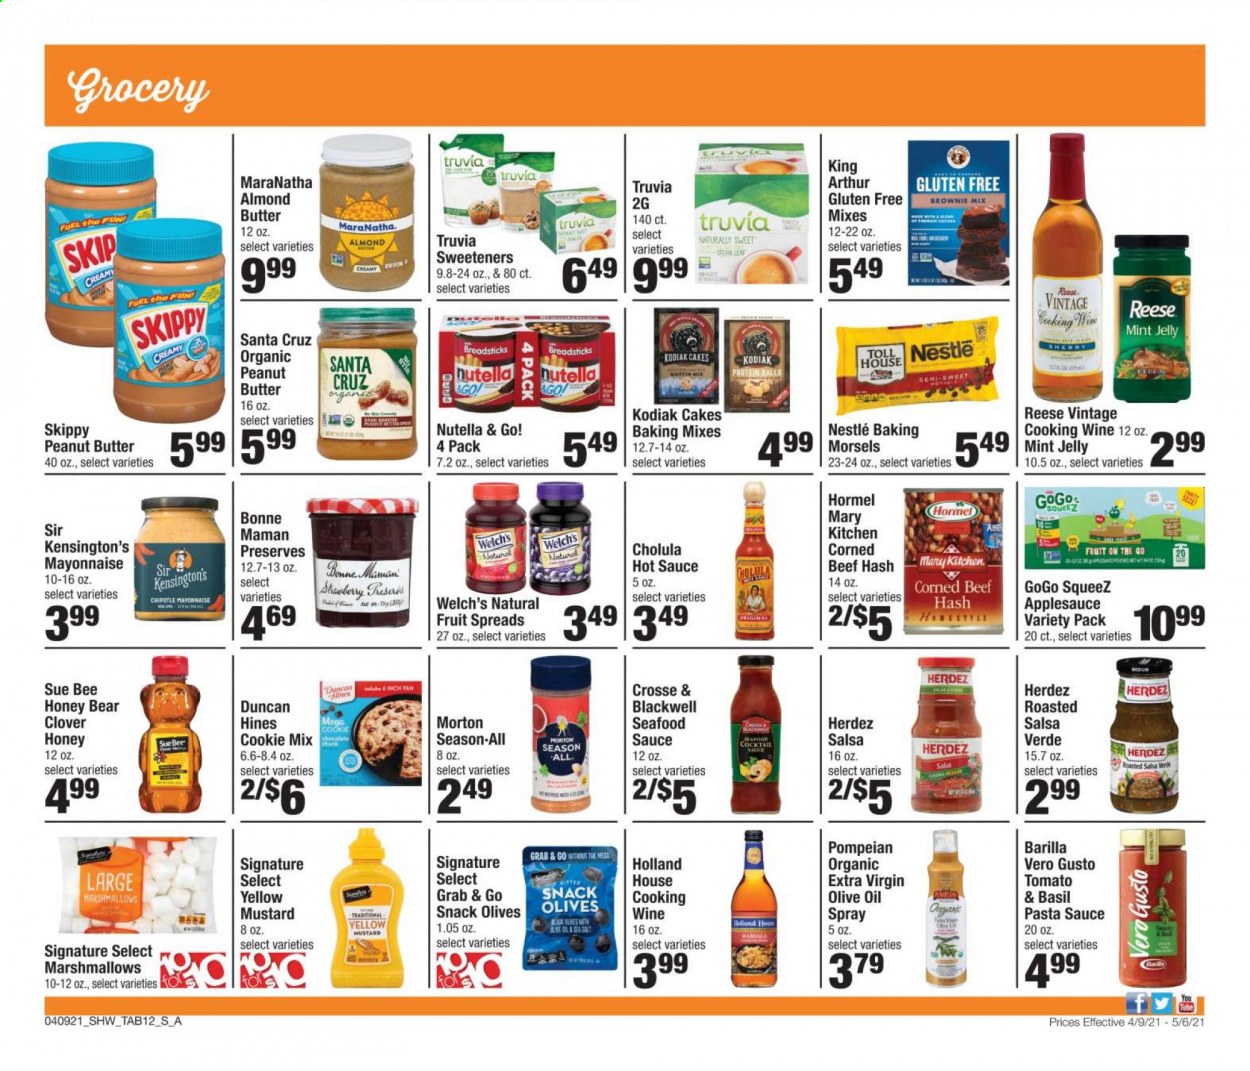 thumbnail - Shaw’s Flyer - 04/09/2021 - 05/06/2021 - Sales products - cake, Welch's, beef hash, pasta sauce, sauce, Barilla, Hormel, corned beef, almond butter, mayonnaise, cookies, marshmallows, Nestlé, Nutella, snack, jelly, olives, mint jelly, mustard, hot sauce, salsa, extra virgin olive oil, olive oil, oil, apple sauce, honey, peanut butter, cooking wine, beef meat, Go!. Page 12.